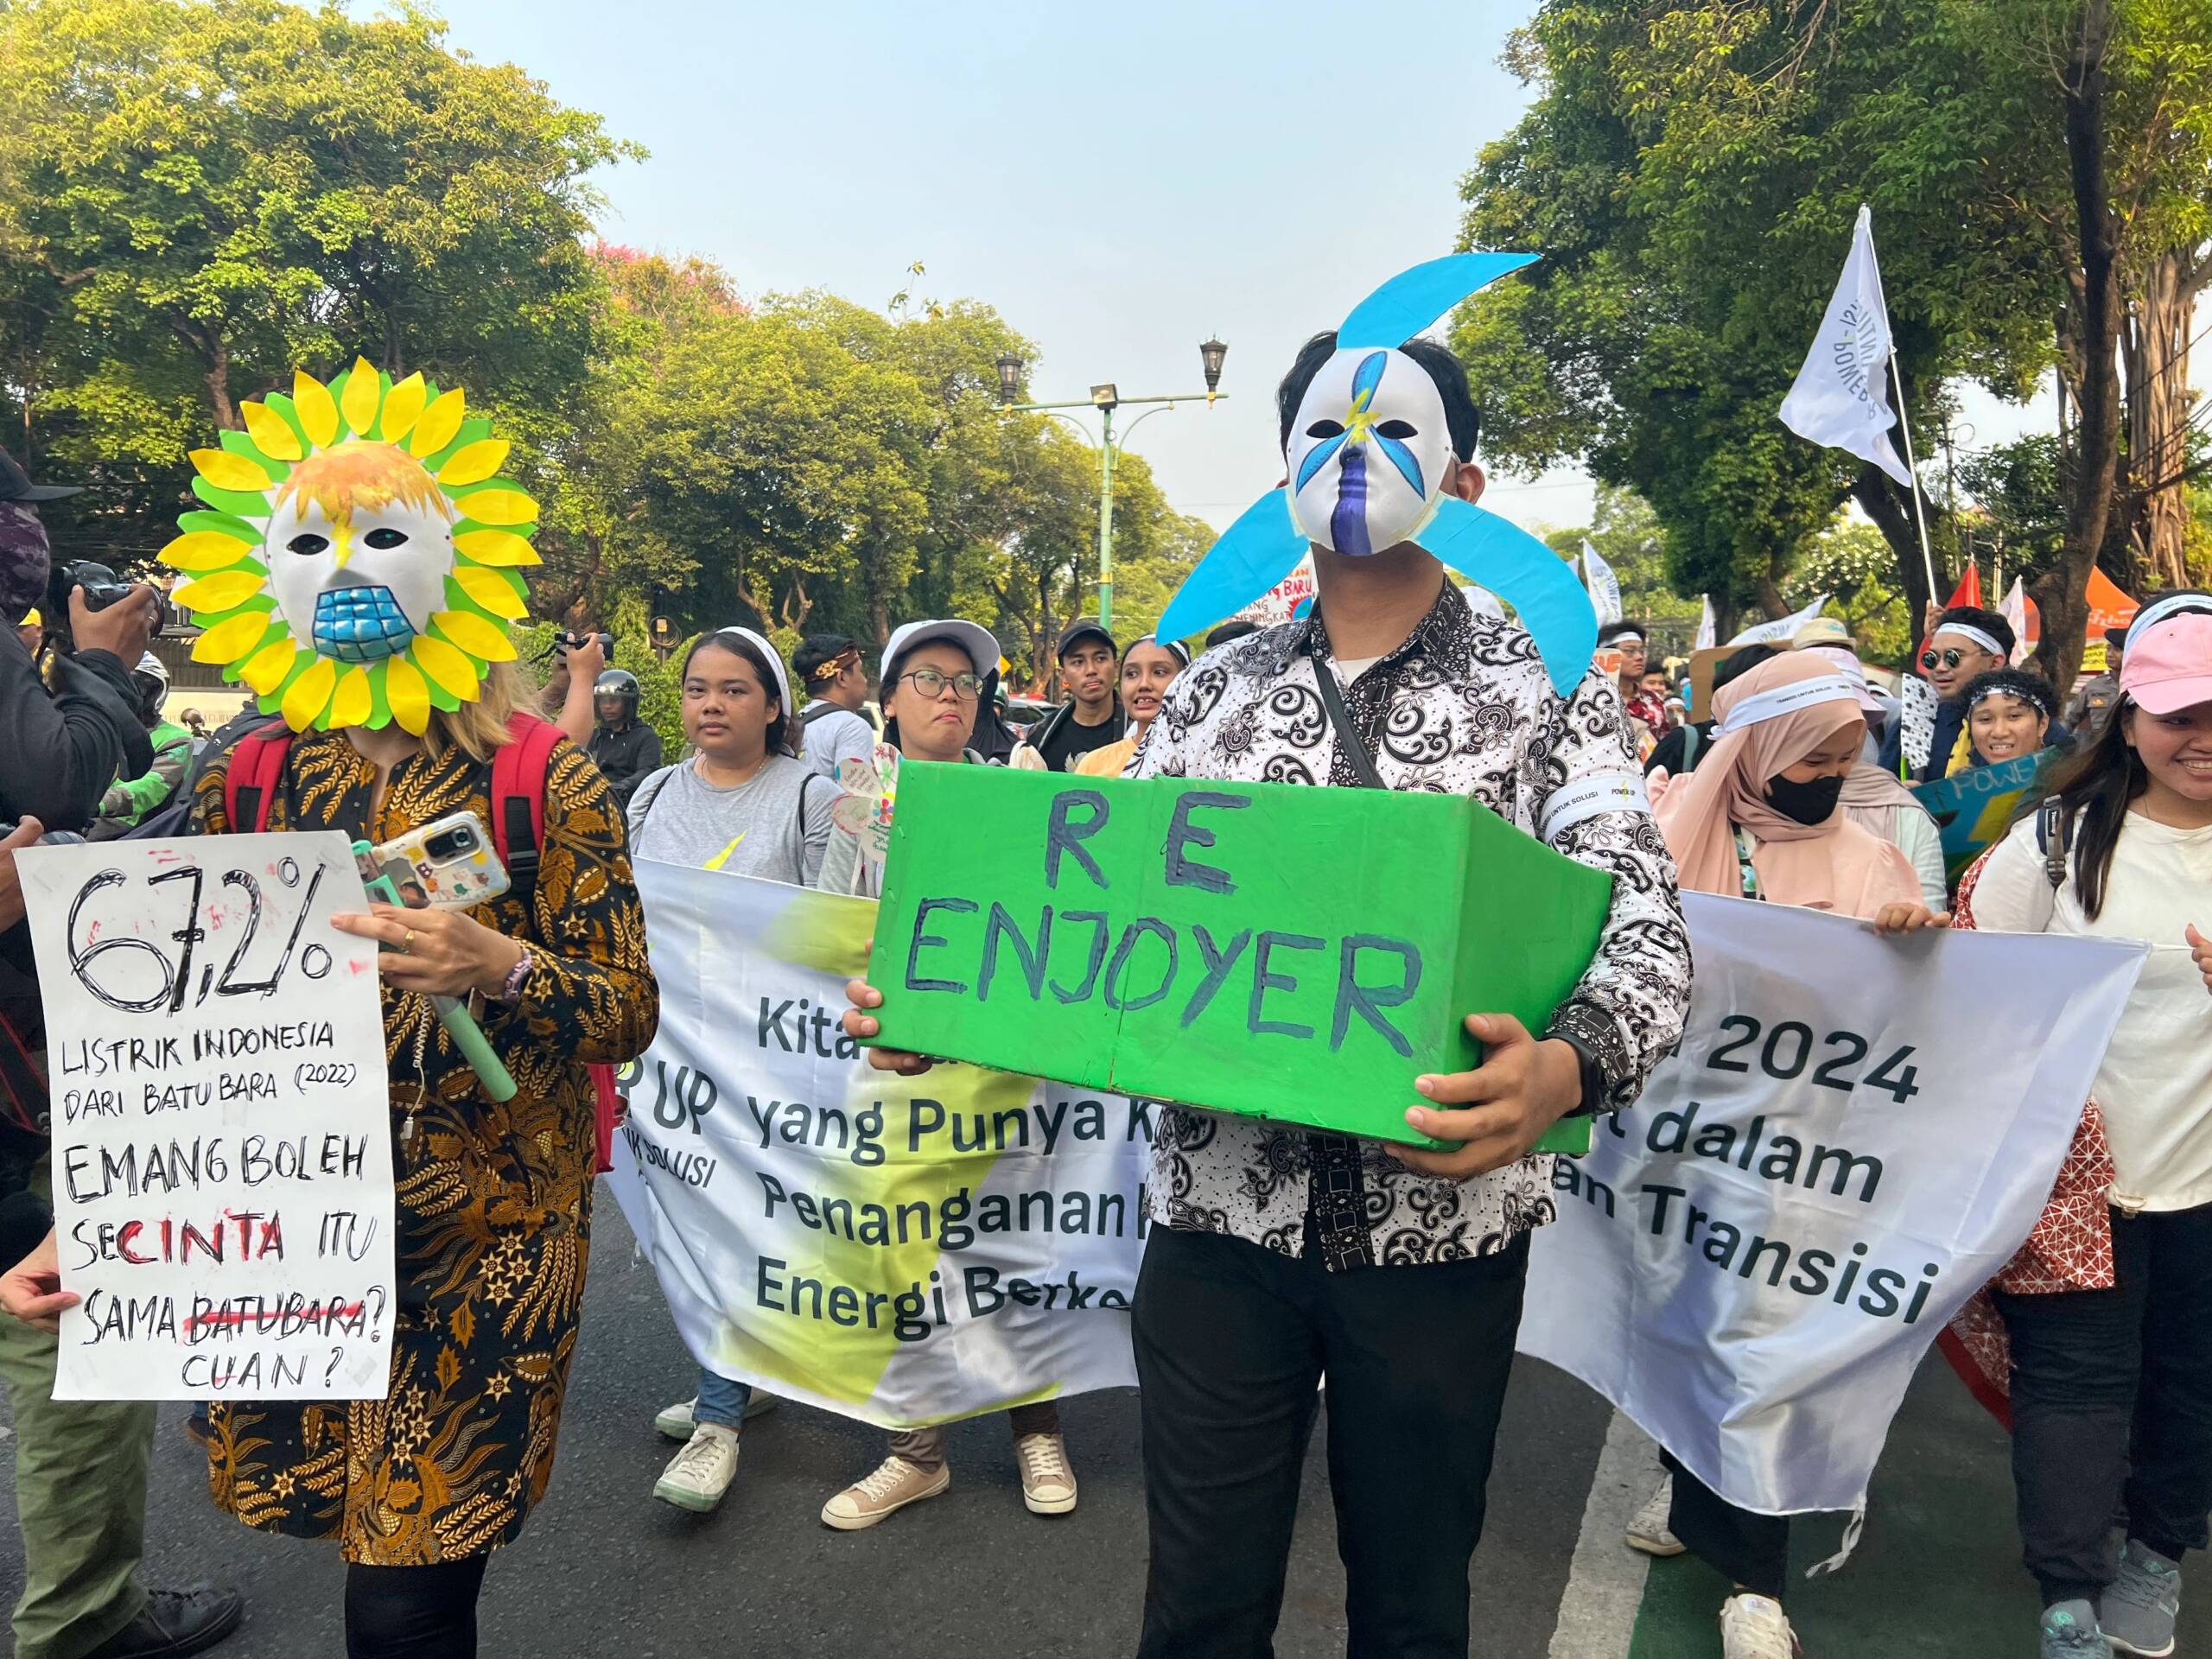 Jakarta, Indonesia, November 3: hundreds of young people and adults marched asking potential presidential candidates to prioritize environmental issues and a just energy transition in the elections next year. Photo credit: Kathleen Lei Limayo